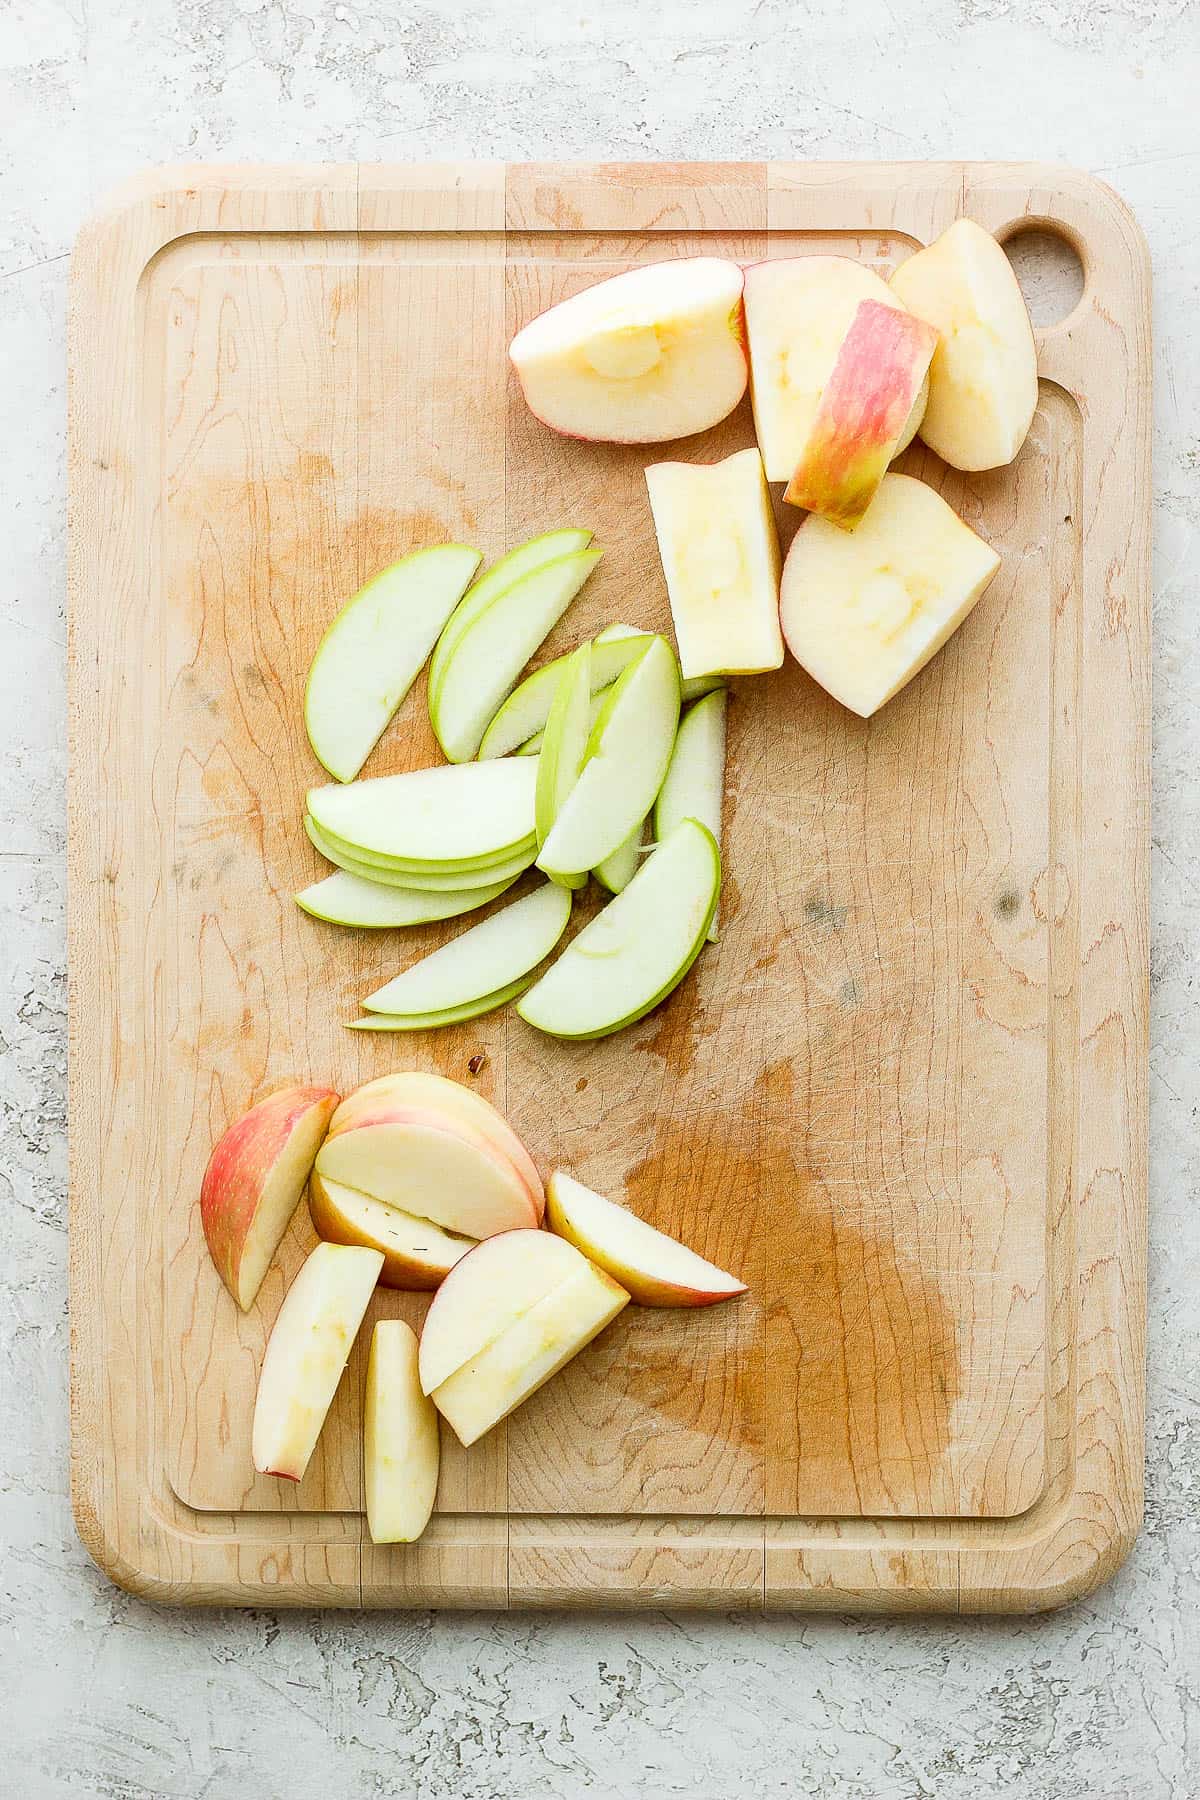 A cutting board showing 3 different types of cut and colored apples.